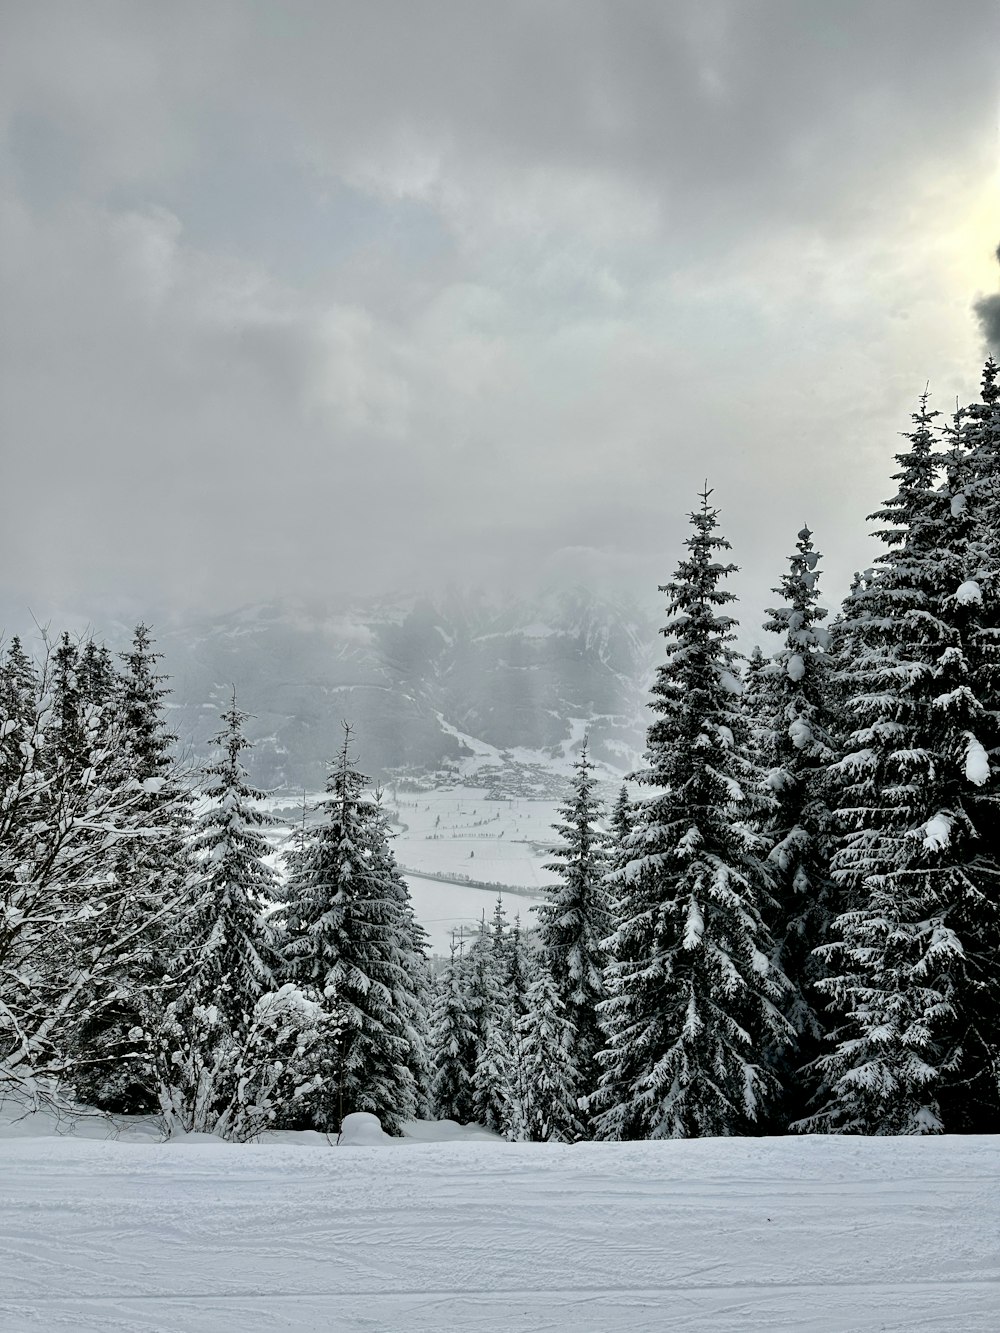 a snowy landscape with trees and a mountain in the background